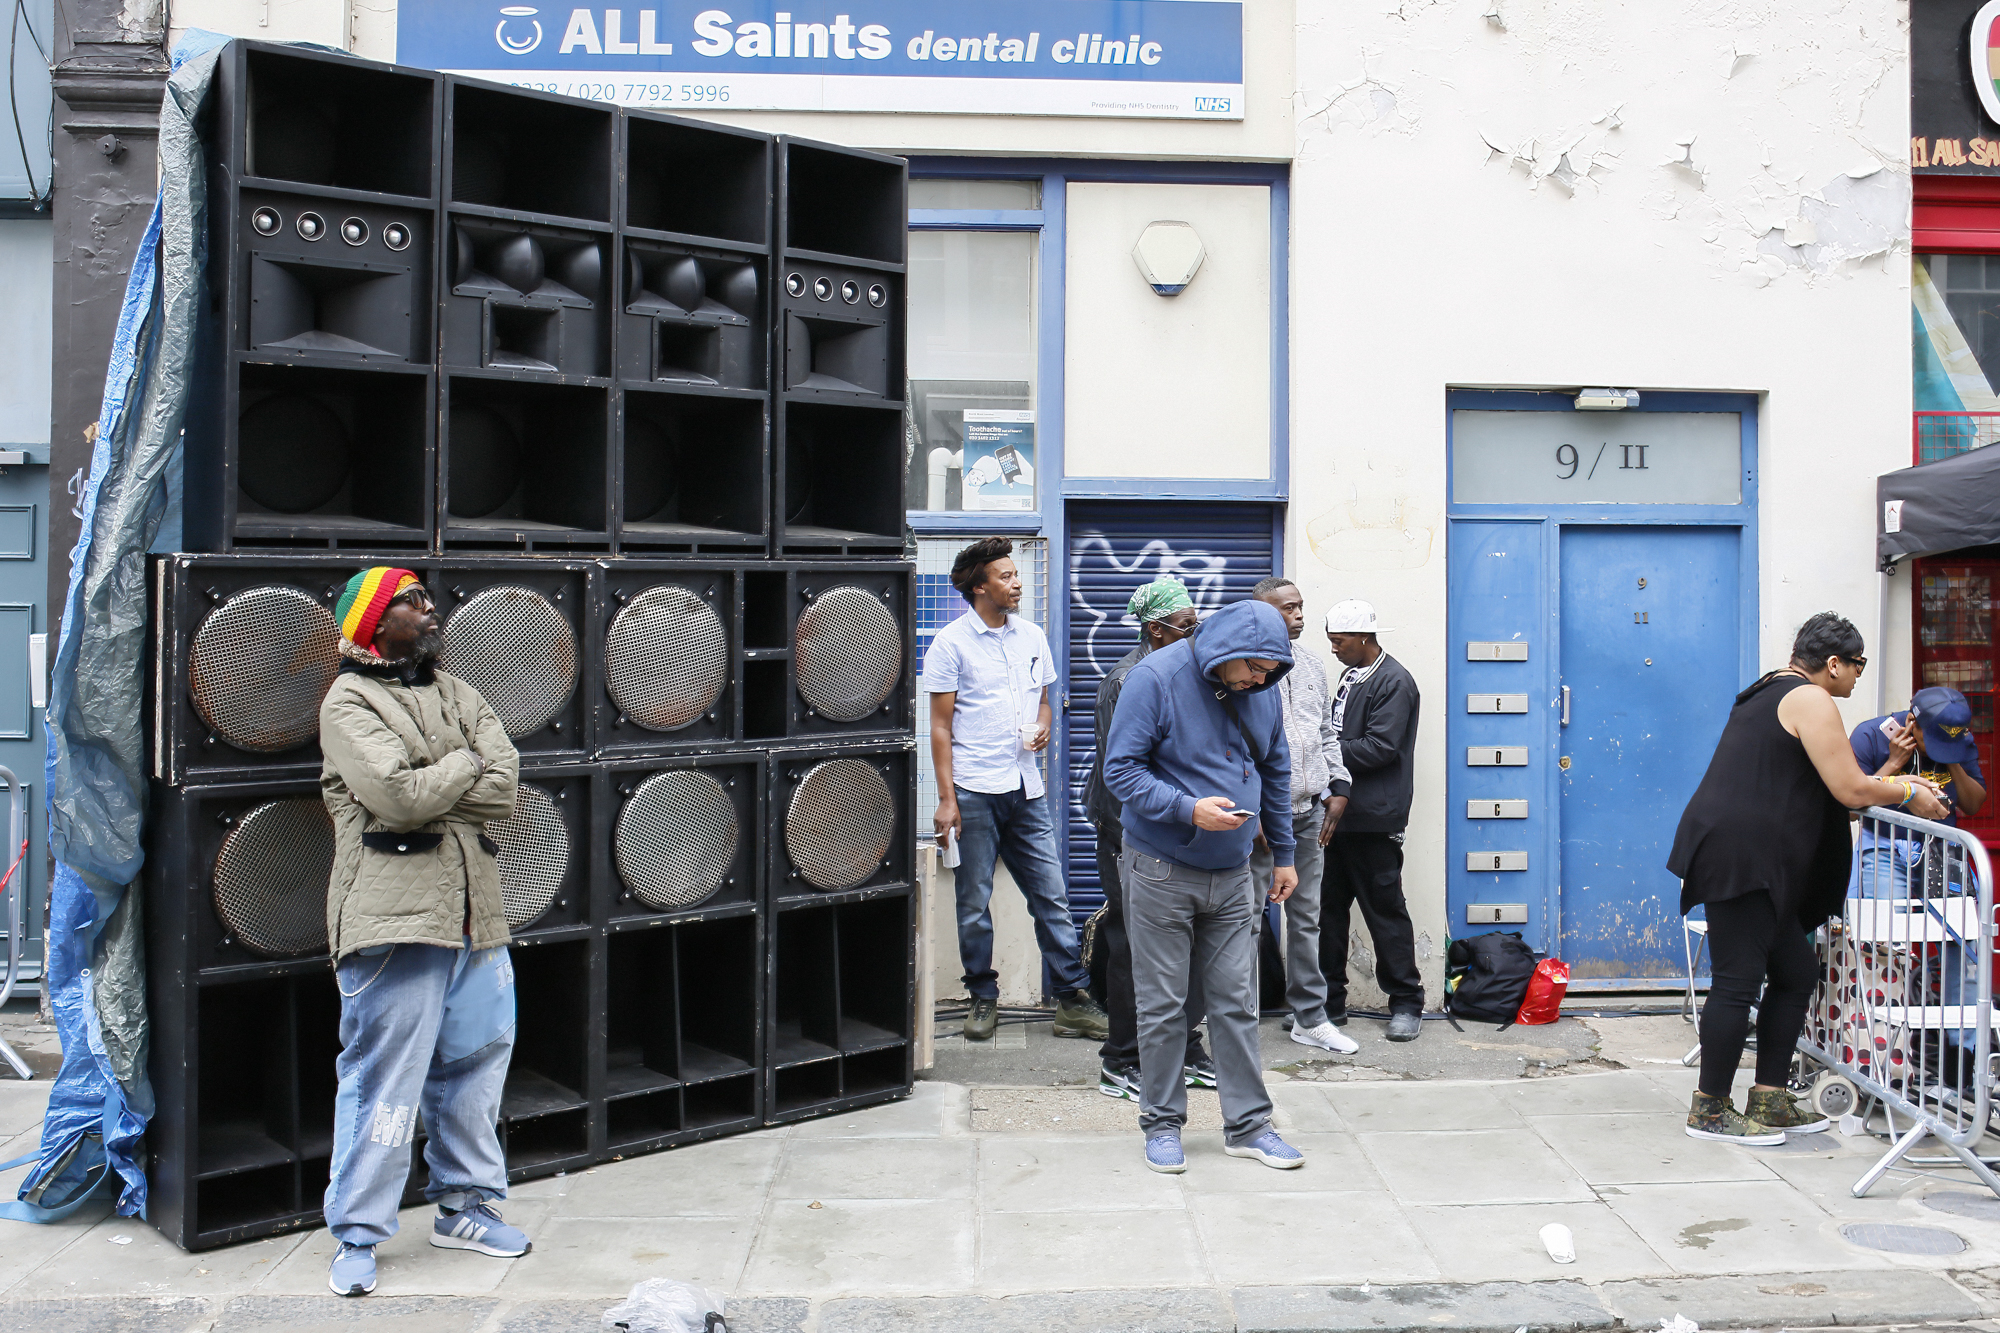 Sound systems on every block compete for maximum volume, Notting Hill Carnival, 2018